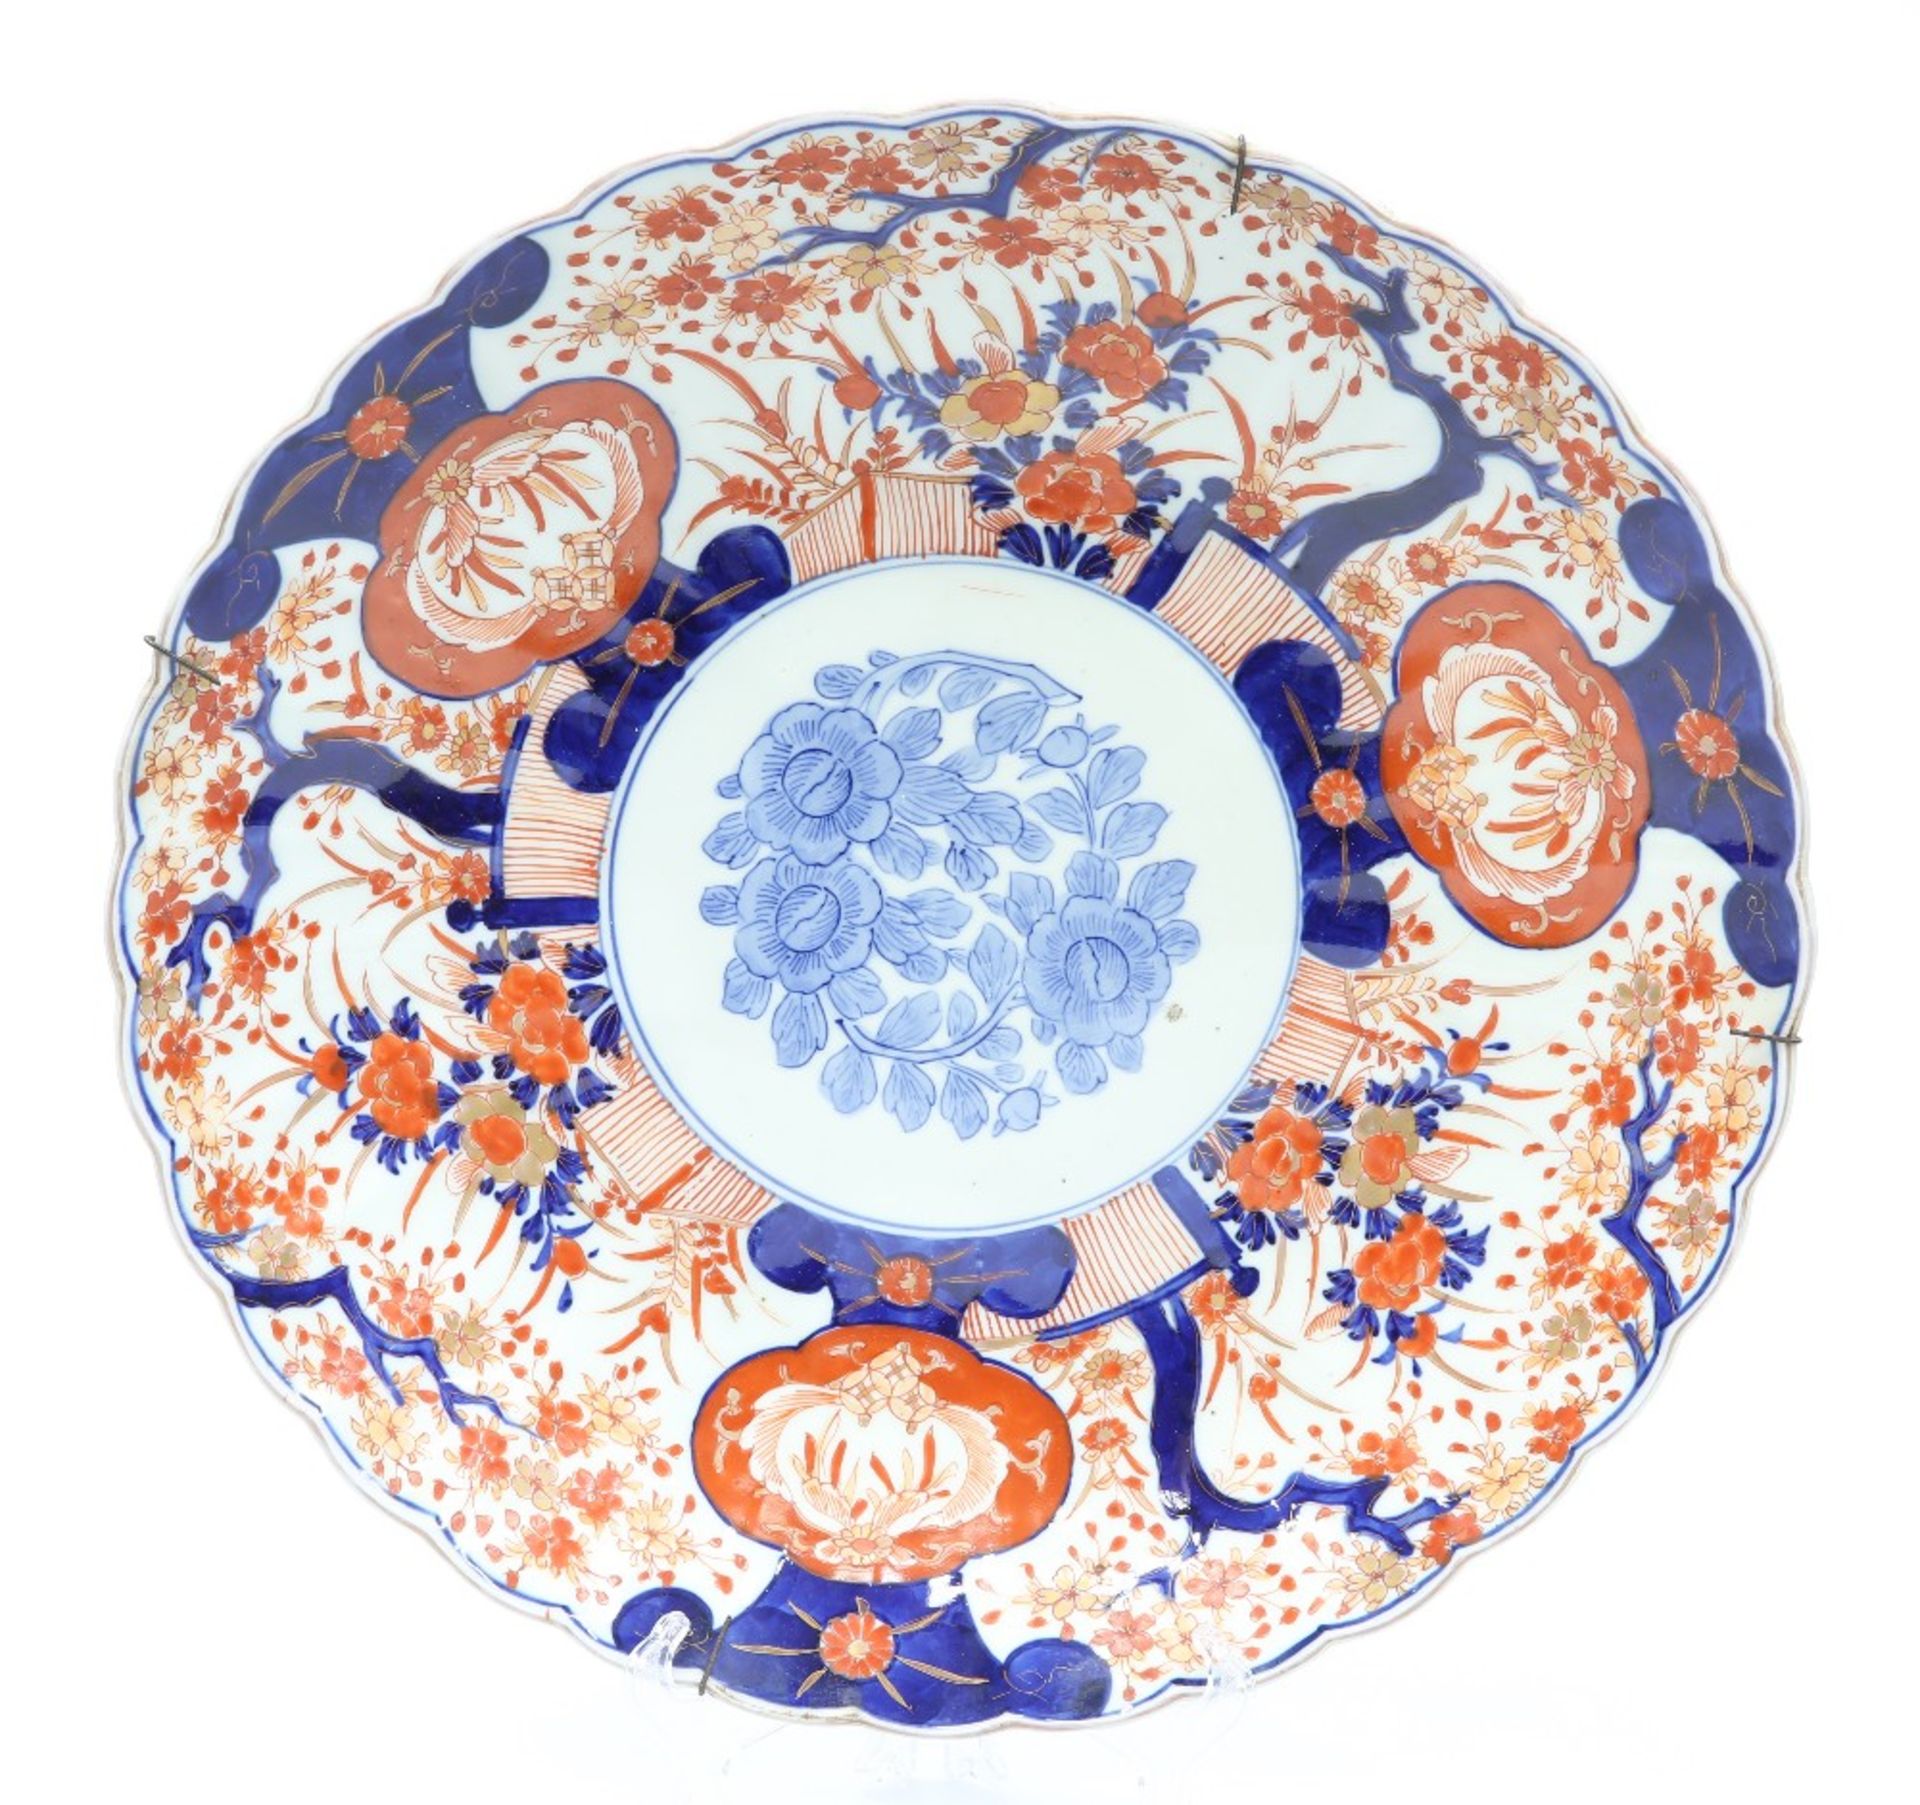 A JAPANESE IMARI CHARGER, LATE 19TH CENTURY